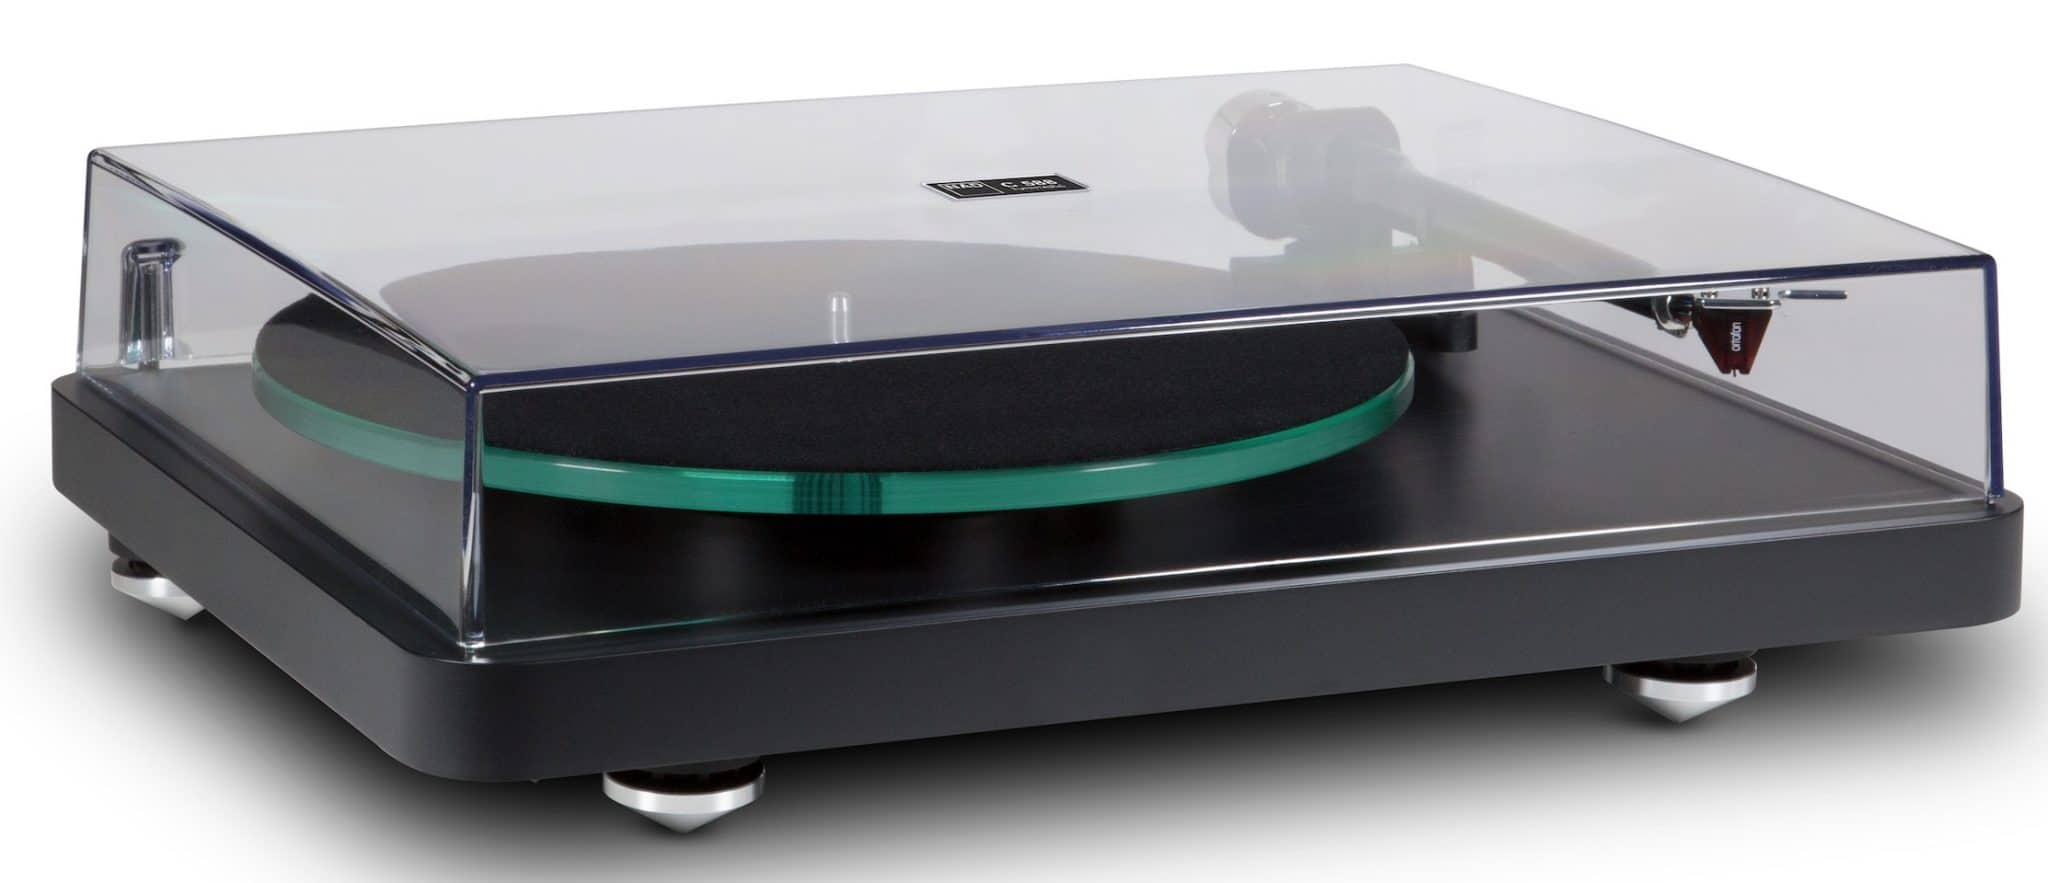 C588 Turntable From NAD